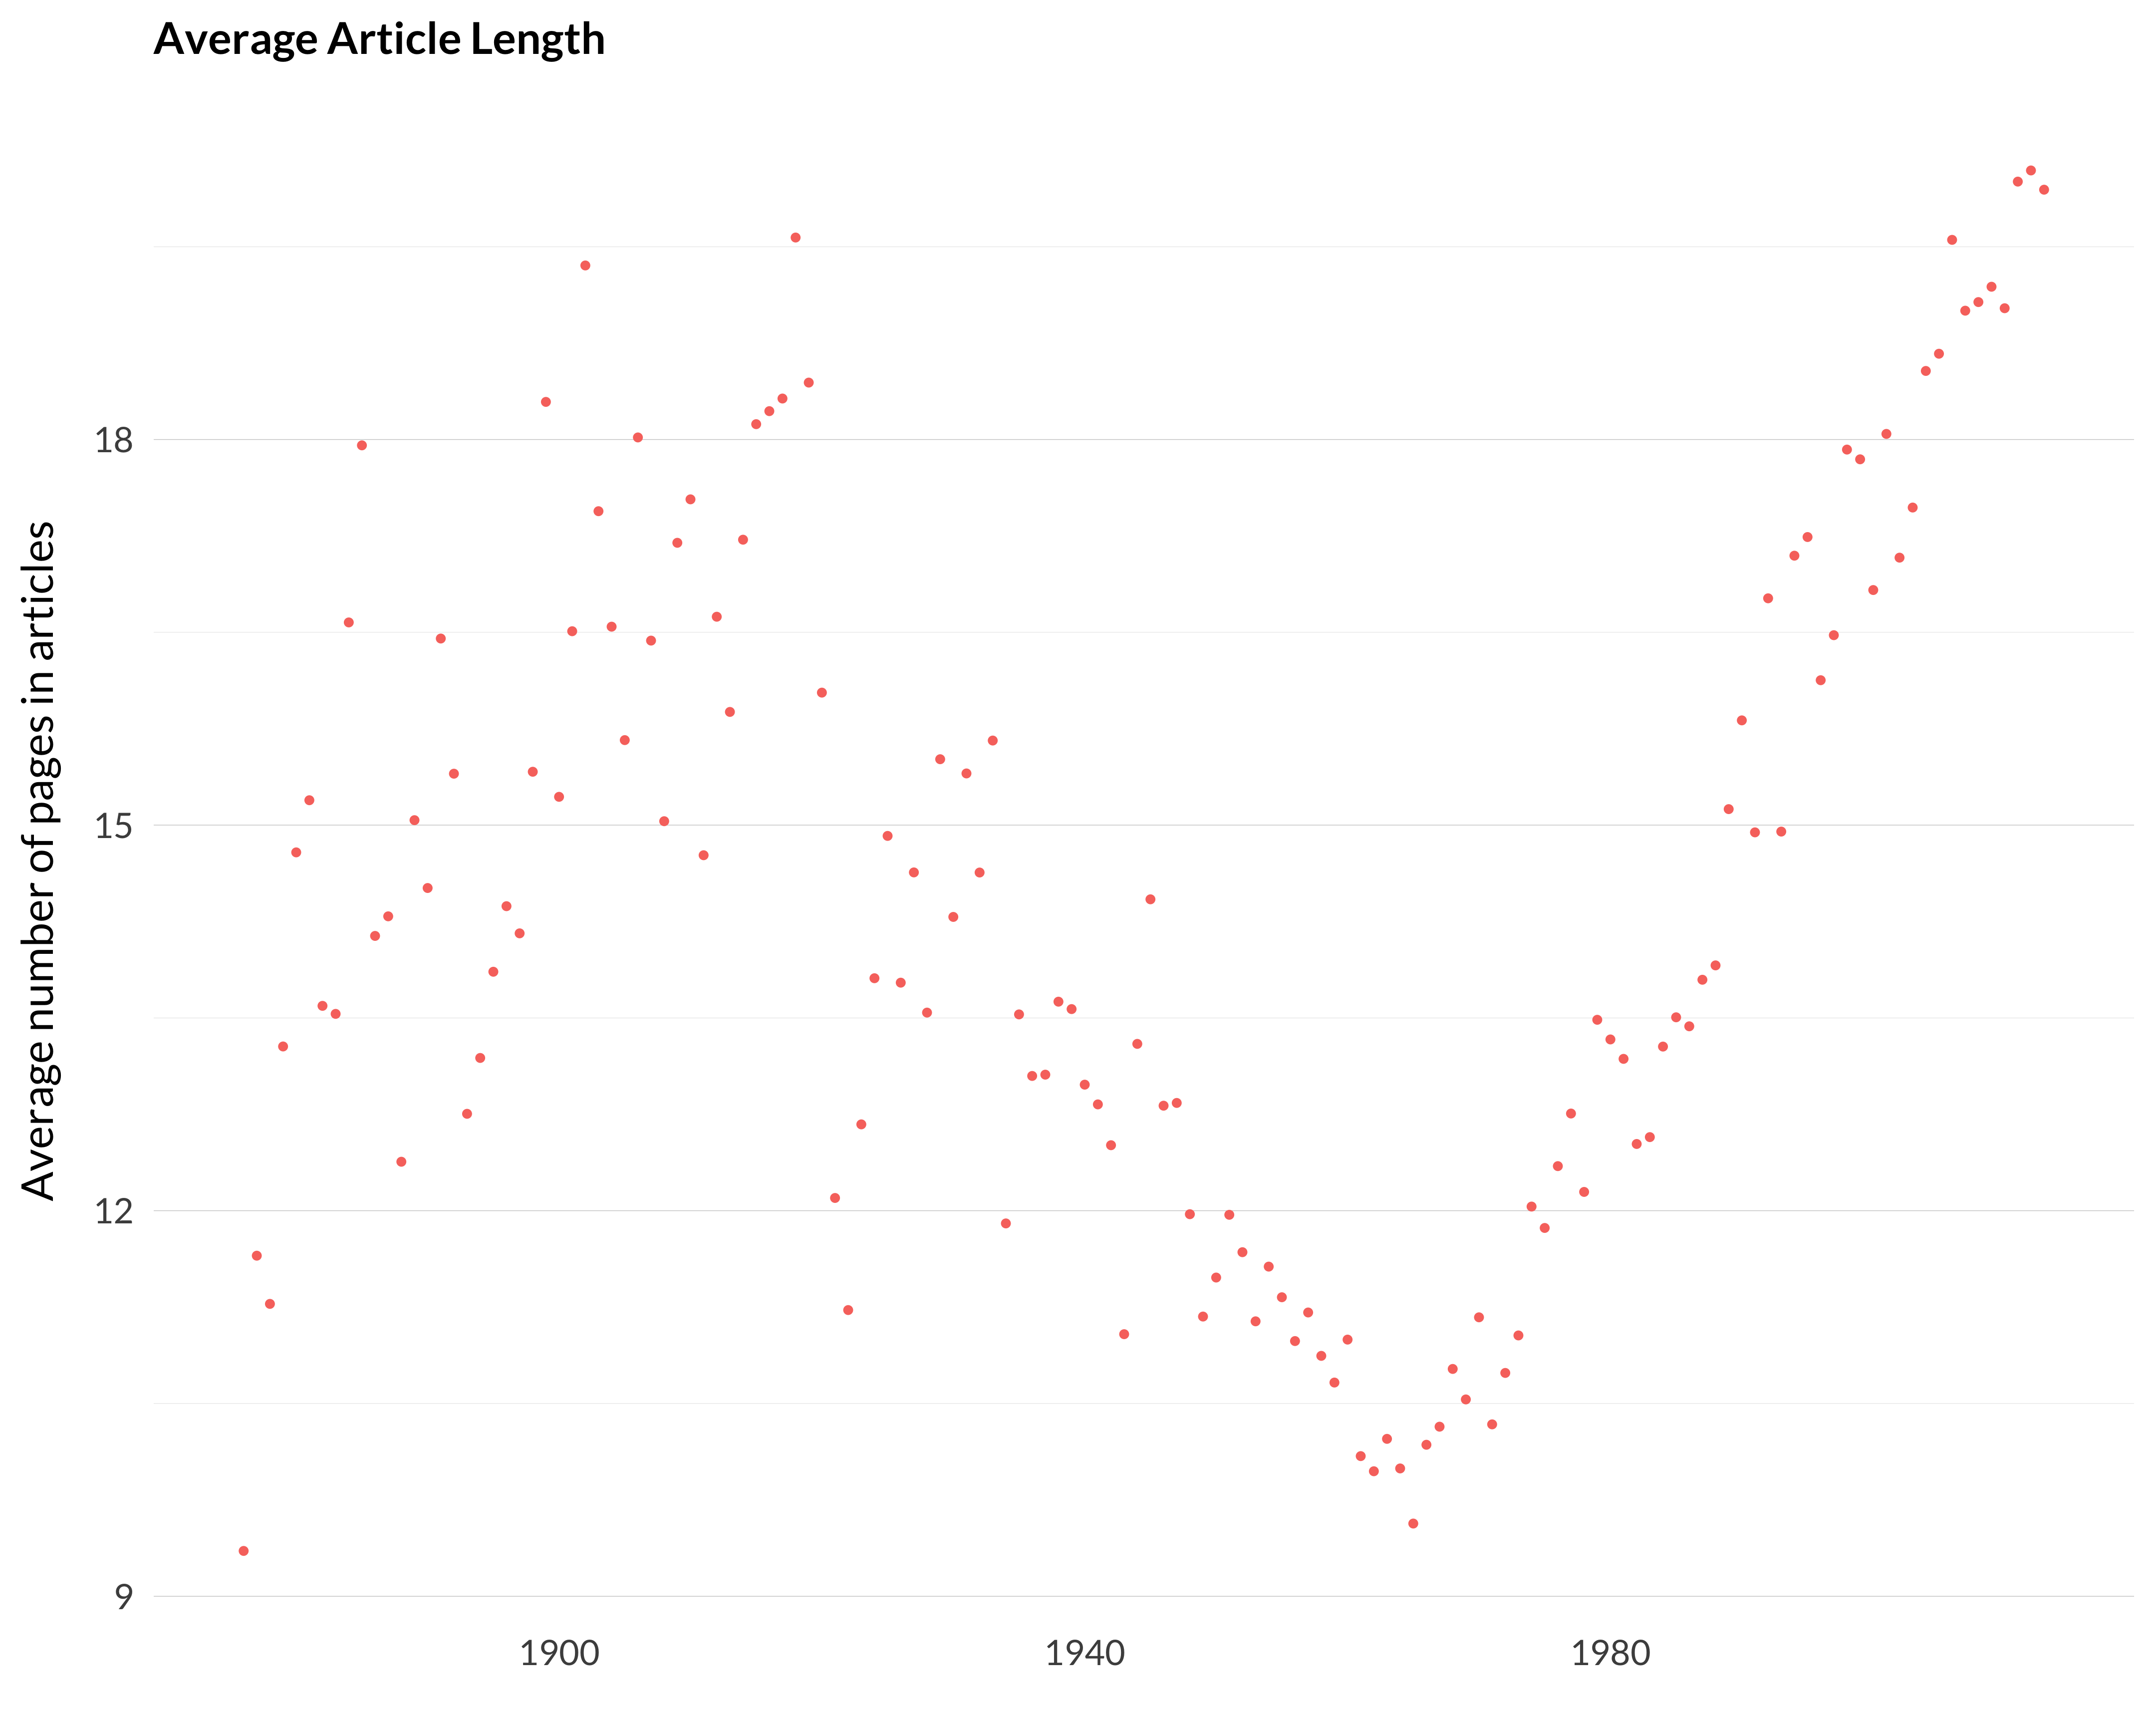 The average number of pages in articles over time. It starts around 12, then rises unevenly to a peak of around 19 around 1910. It then falls almost linearly to around 9 in the mid-1960s. The it bounces, rising linearly at almost the same rate it fell. The new peak is around 20 at the end of the data in 2013, but it doesn't look like a peak; it looks like that's just where the data ends, and the trend would probably continue into the future.